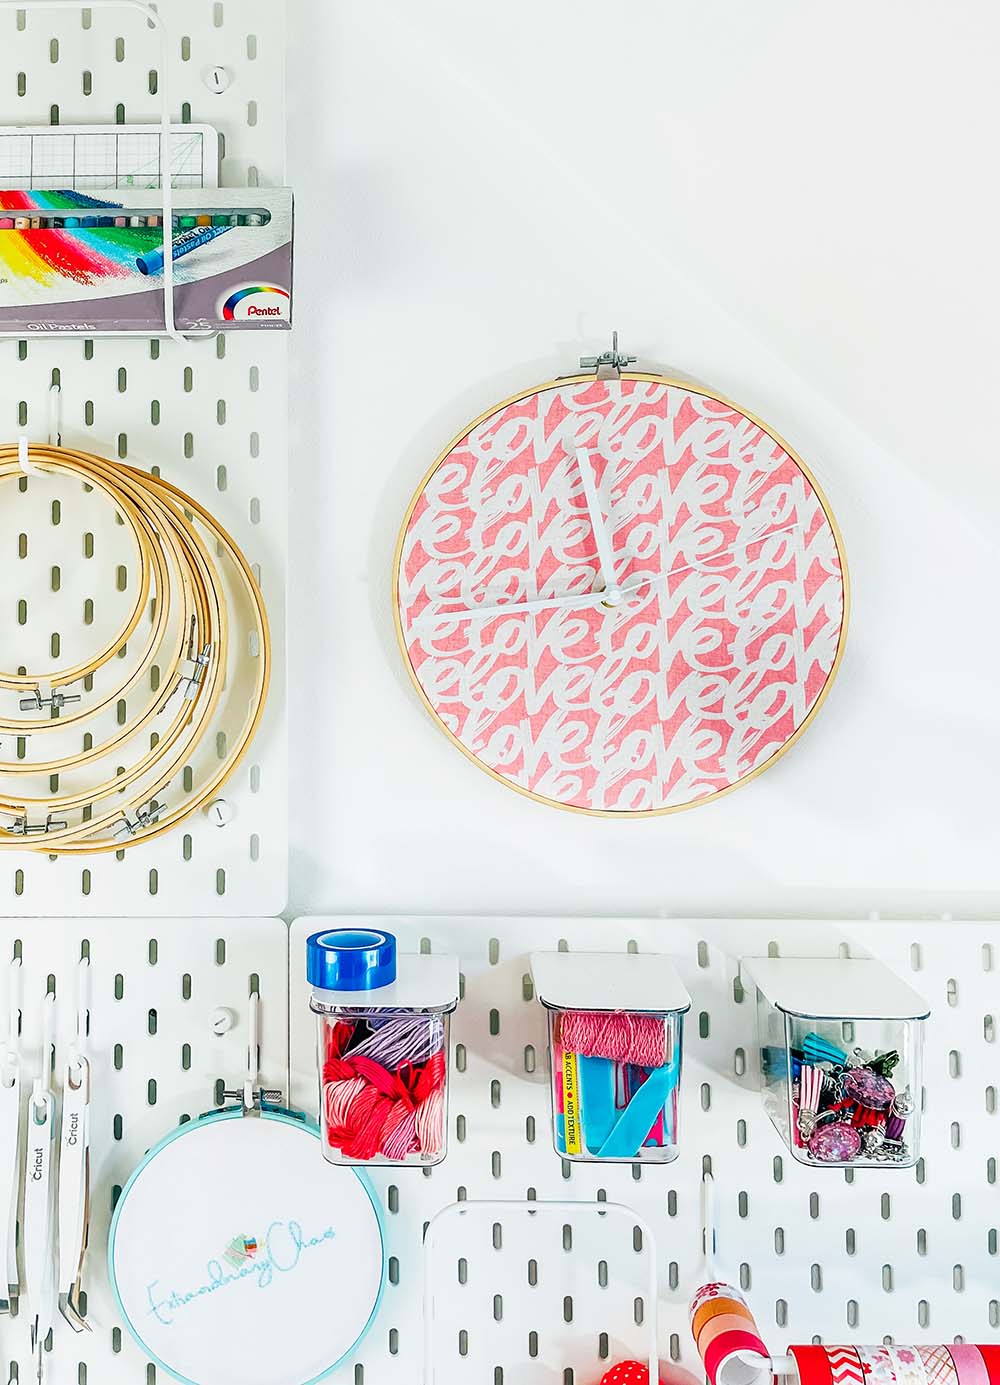 How to make a Clock with an embroidery hoop